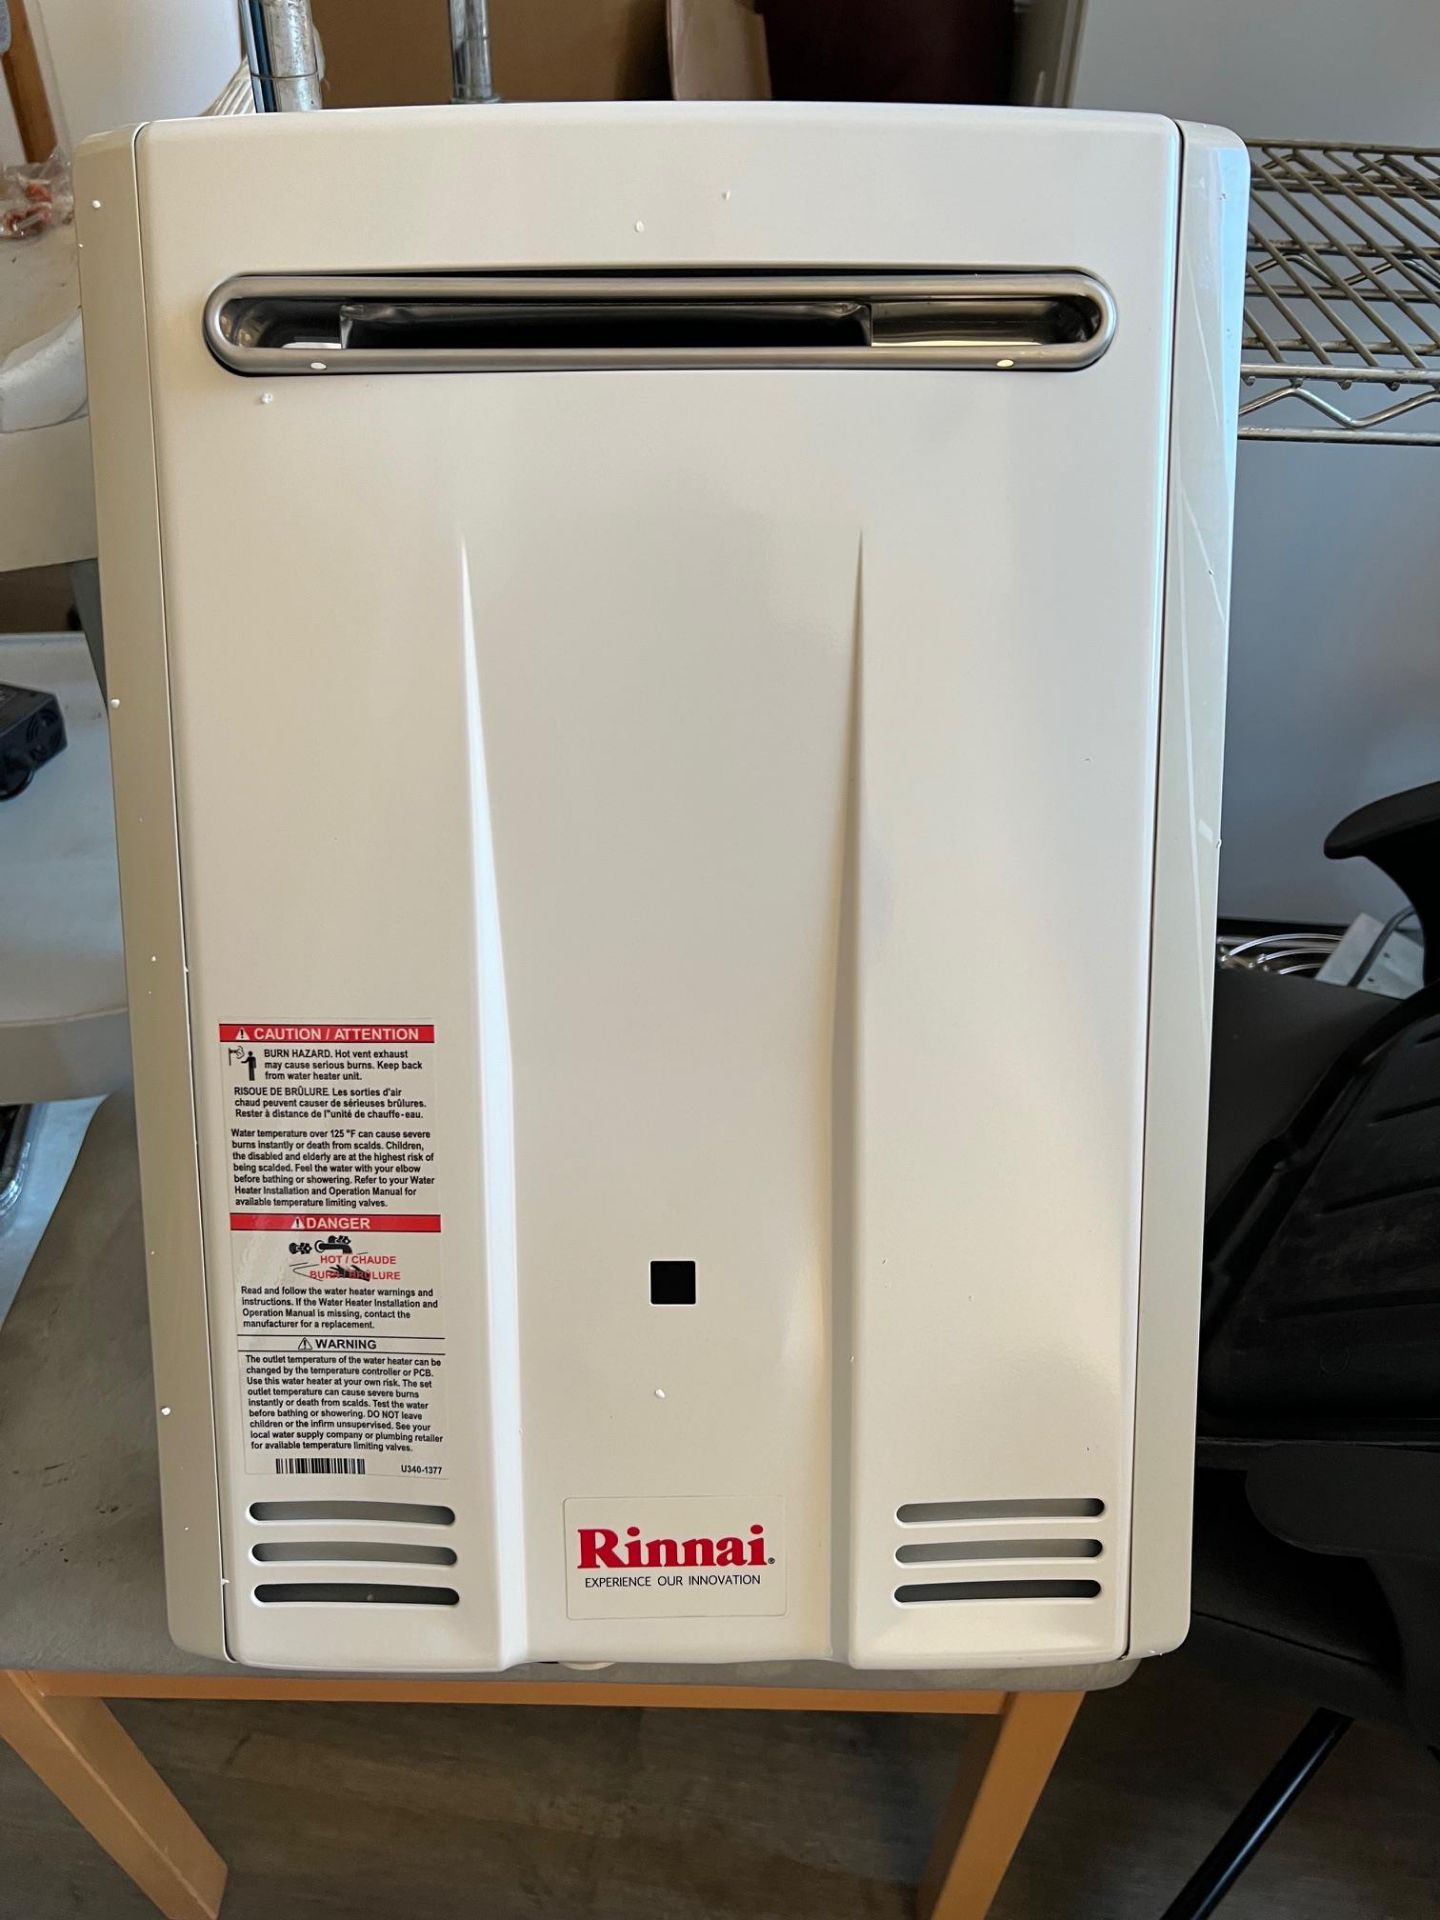 RINNAI, TANKLESS WATER HEATER (GAS), BRAND NEW - Image 3 of 6